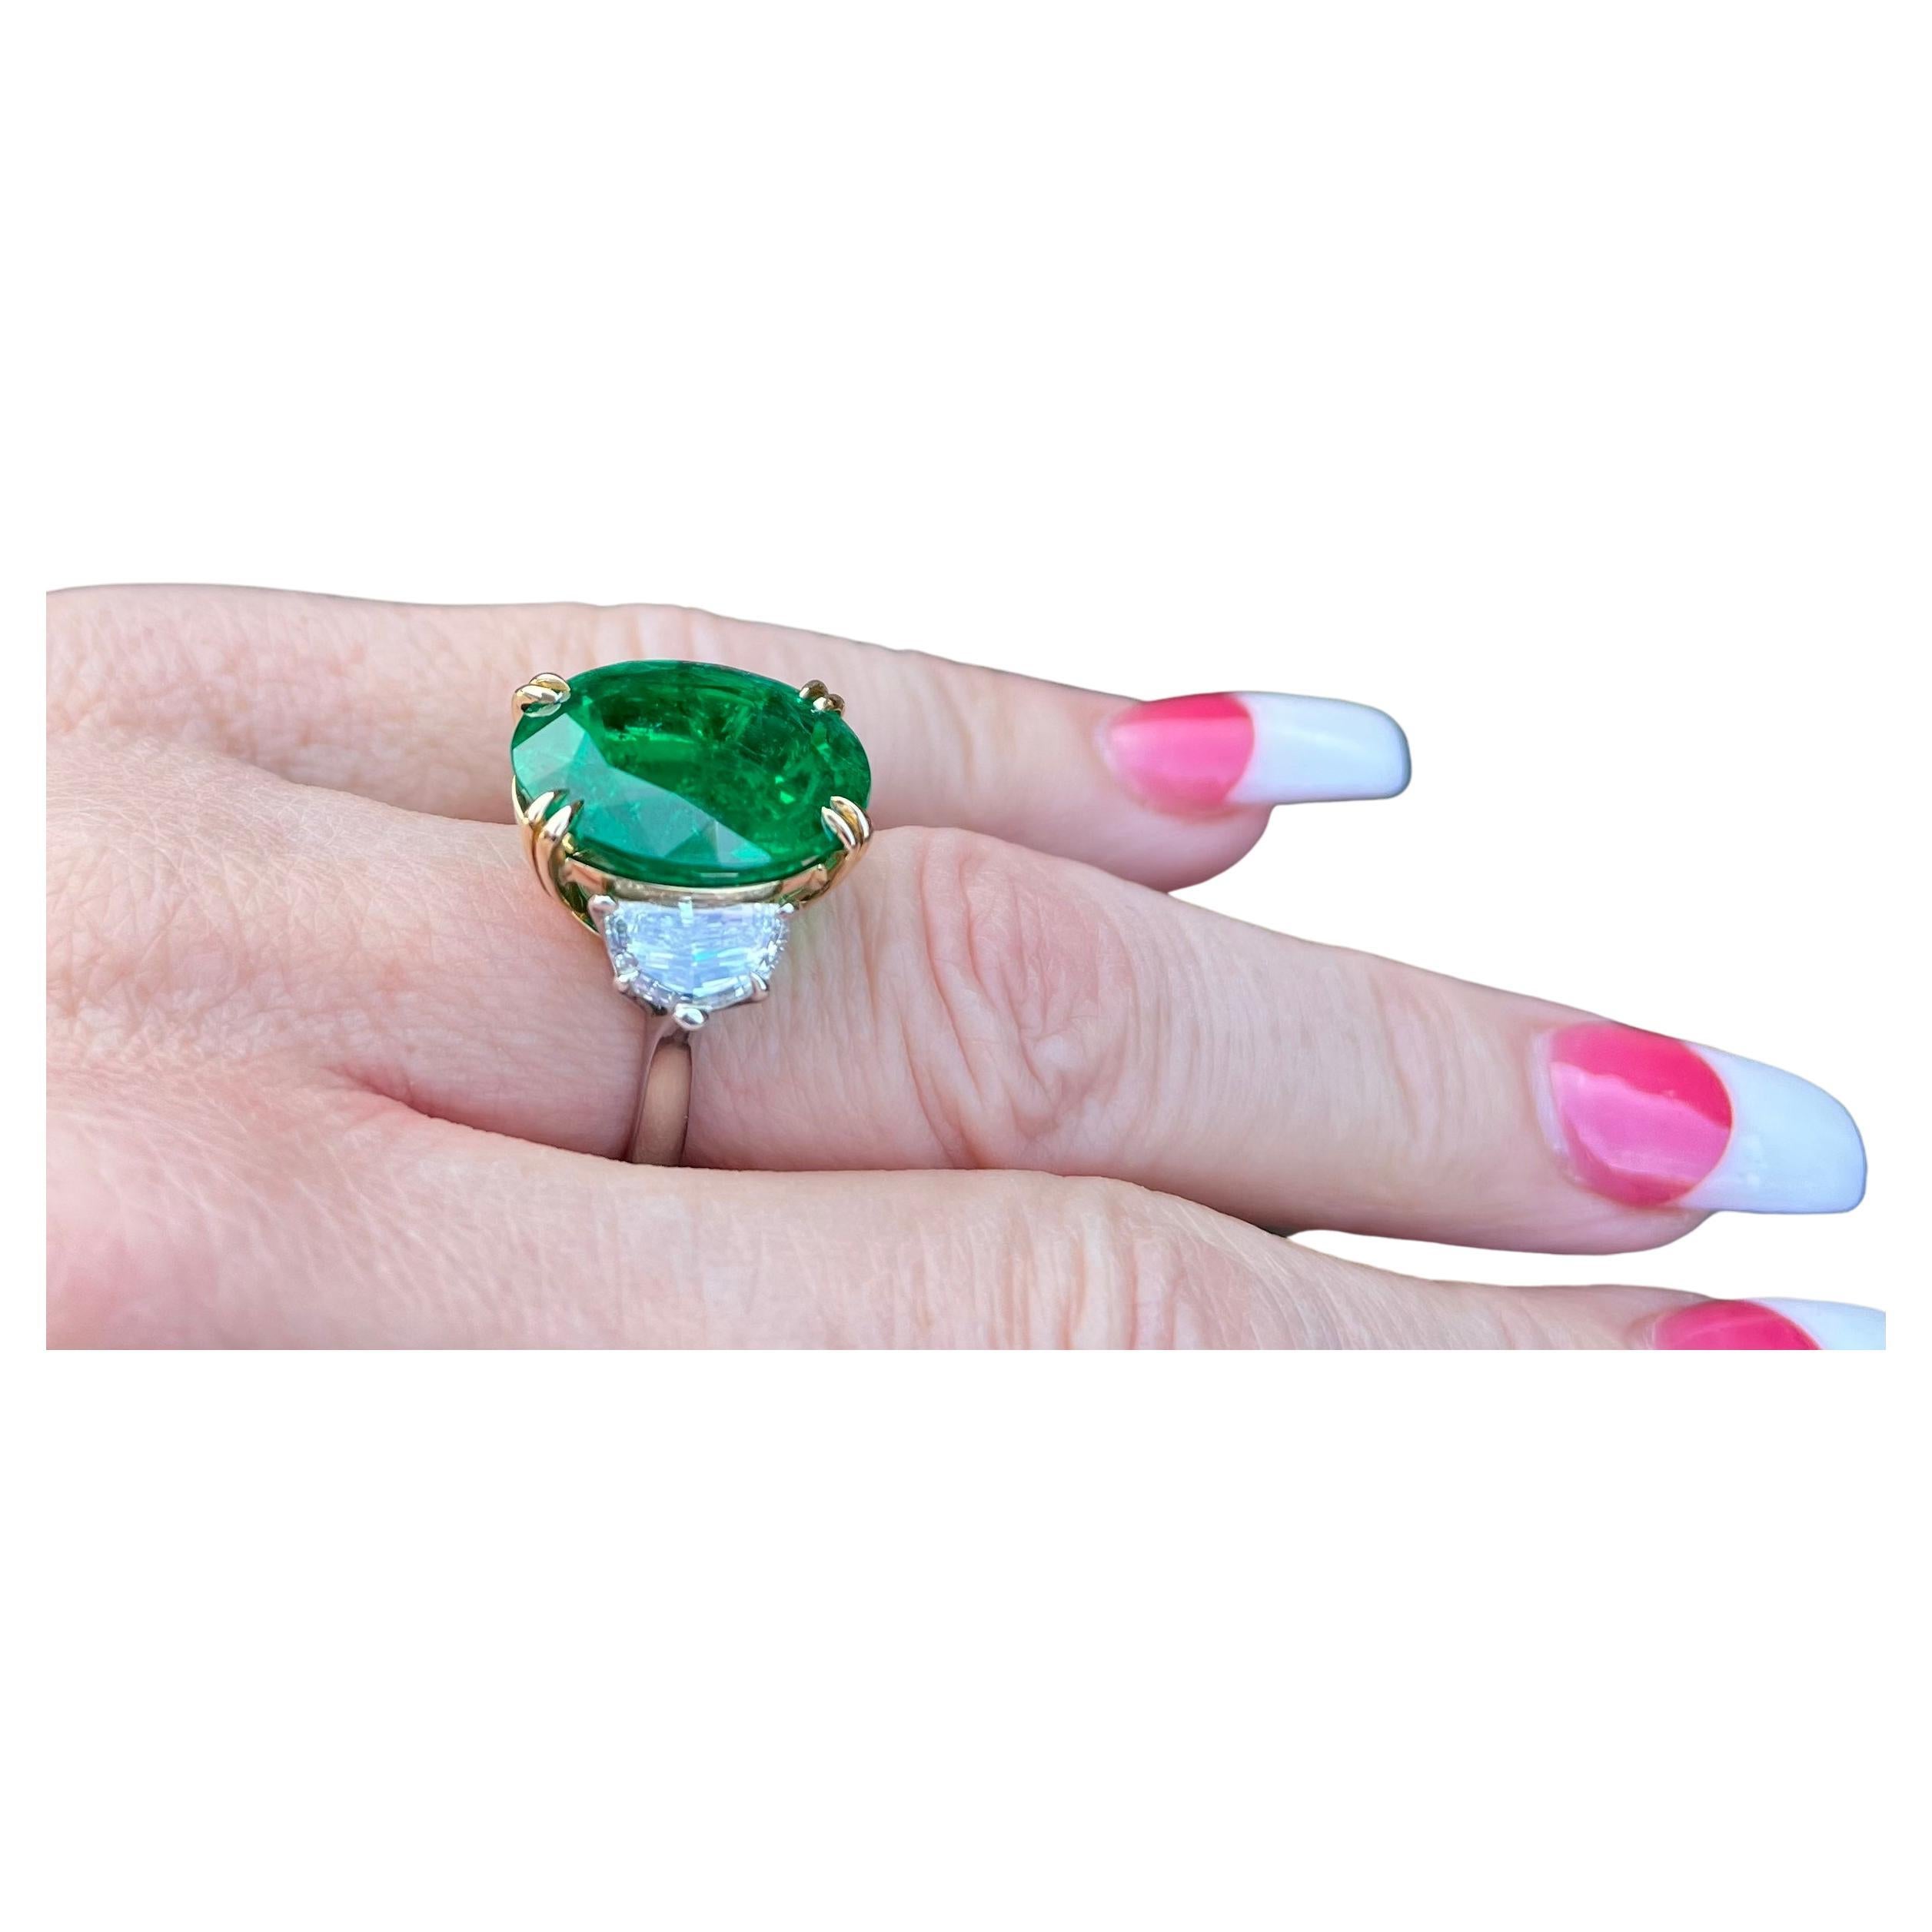 Incredible and very noteworthy, 16.04 carat estate AGL Certified huge oval modified brilliant cut Columbian Emerald and Diamond Ring is set in 18 karat white and yellow gold. This is the most incredible emerald and diamond ring I have ever laid my